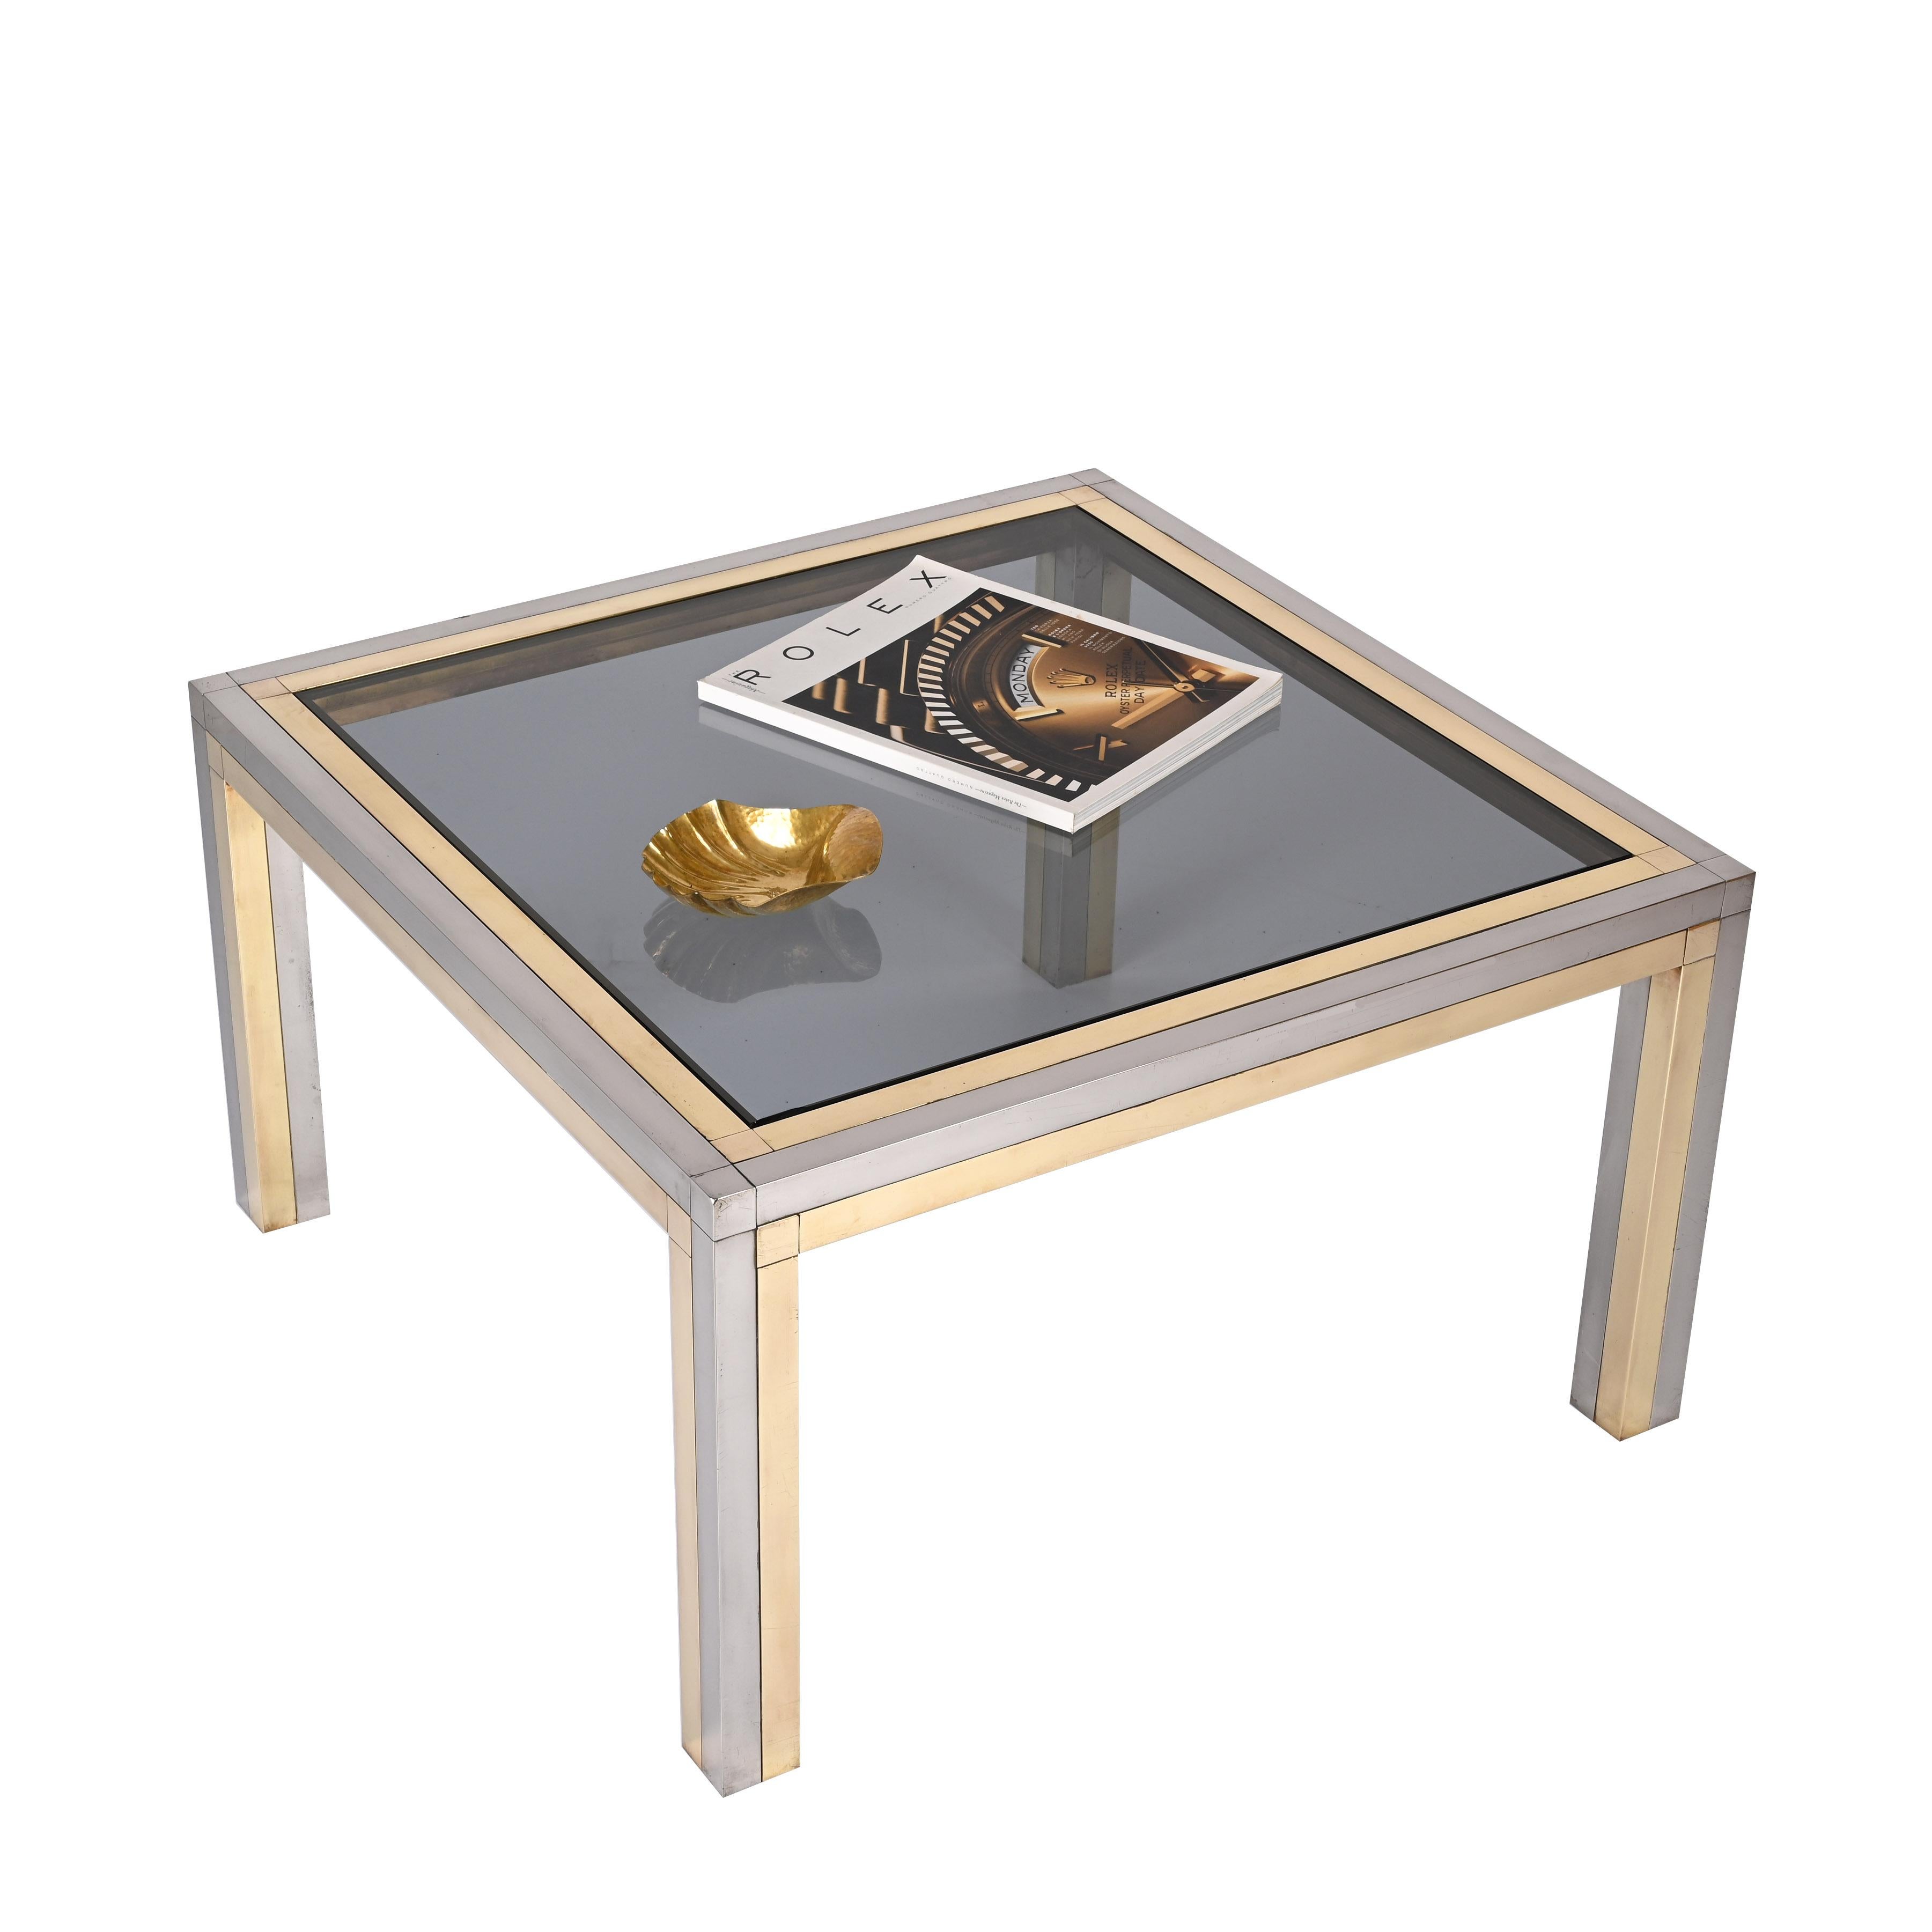 Romeo Rega Brass, Chrome and Smoked Glass Square Italian Coffee Table, 1970s For Sale 8